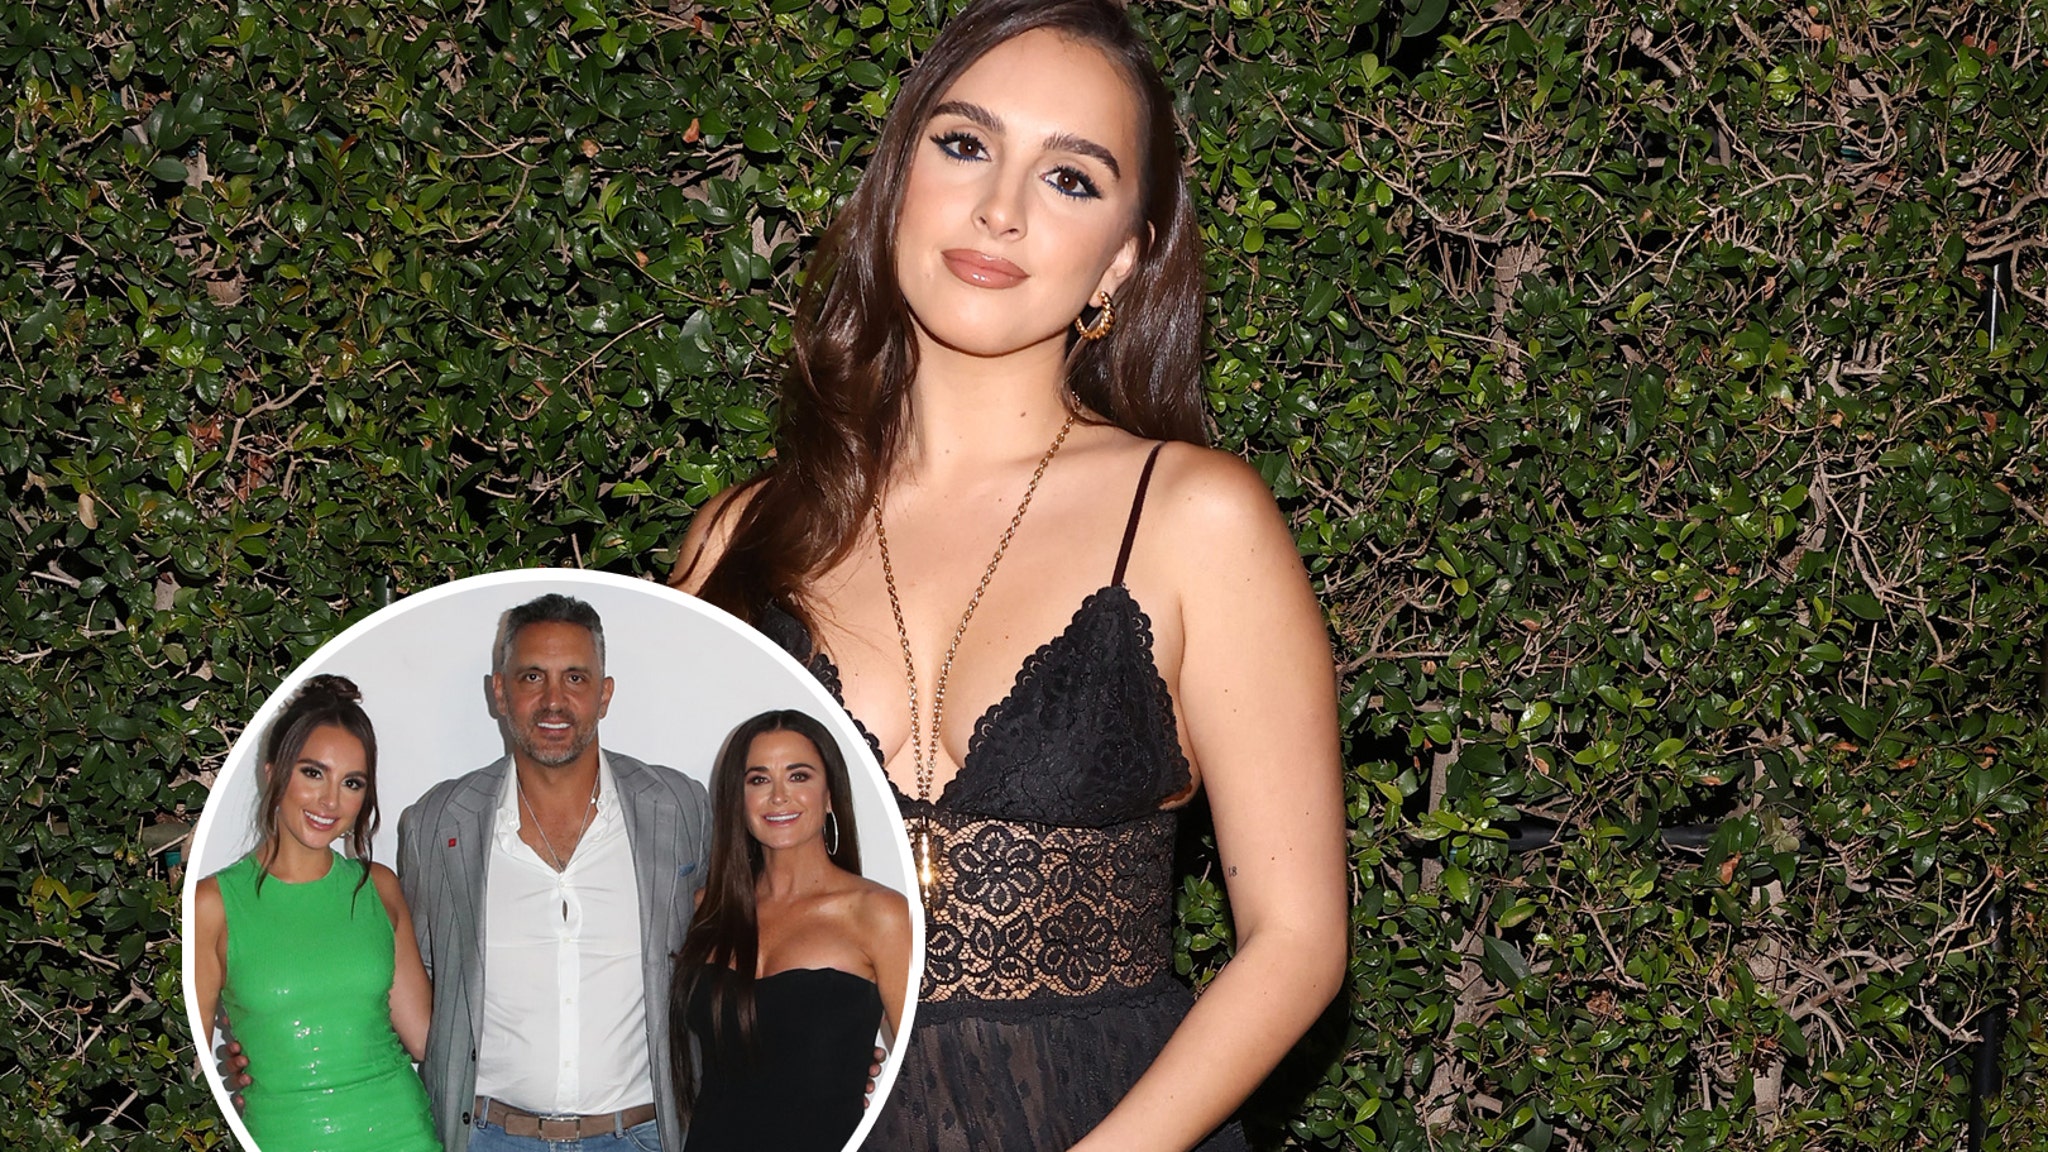 Kyle Richards' Daughter Alexia Umansky Found Out About Parents' Separation from the News